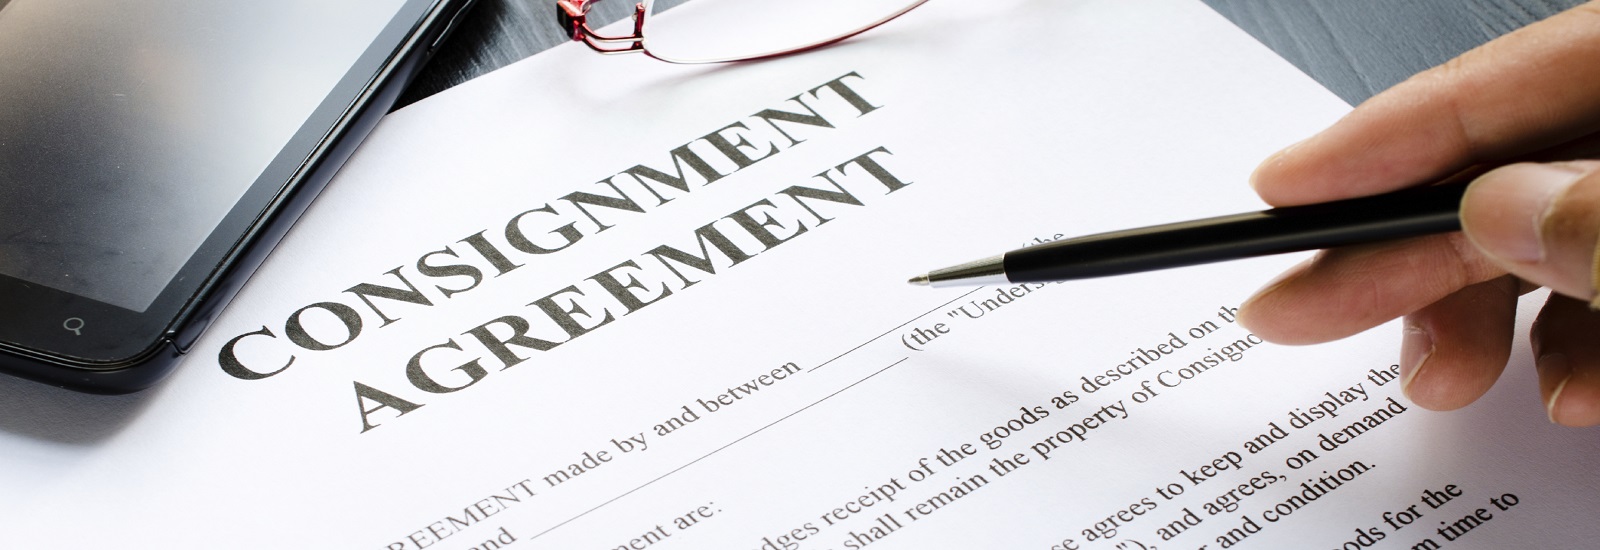 consignment agreement